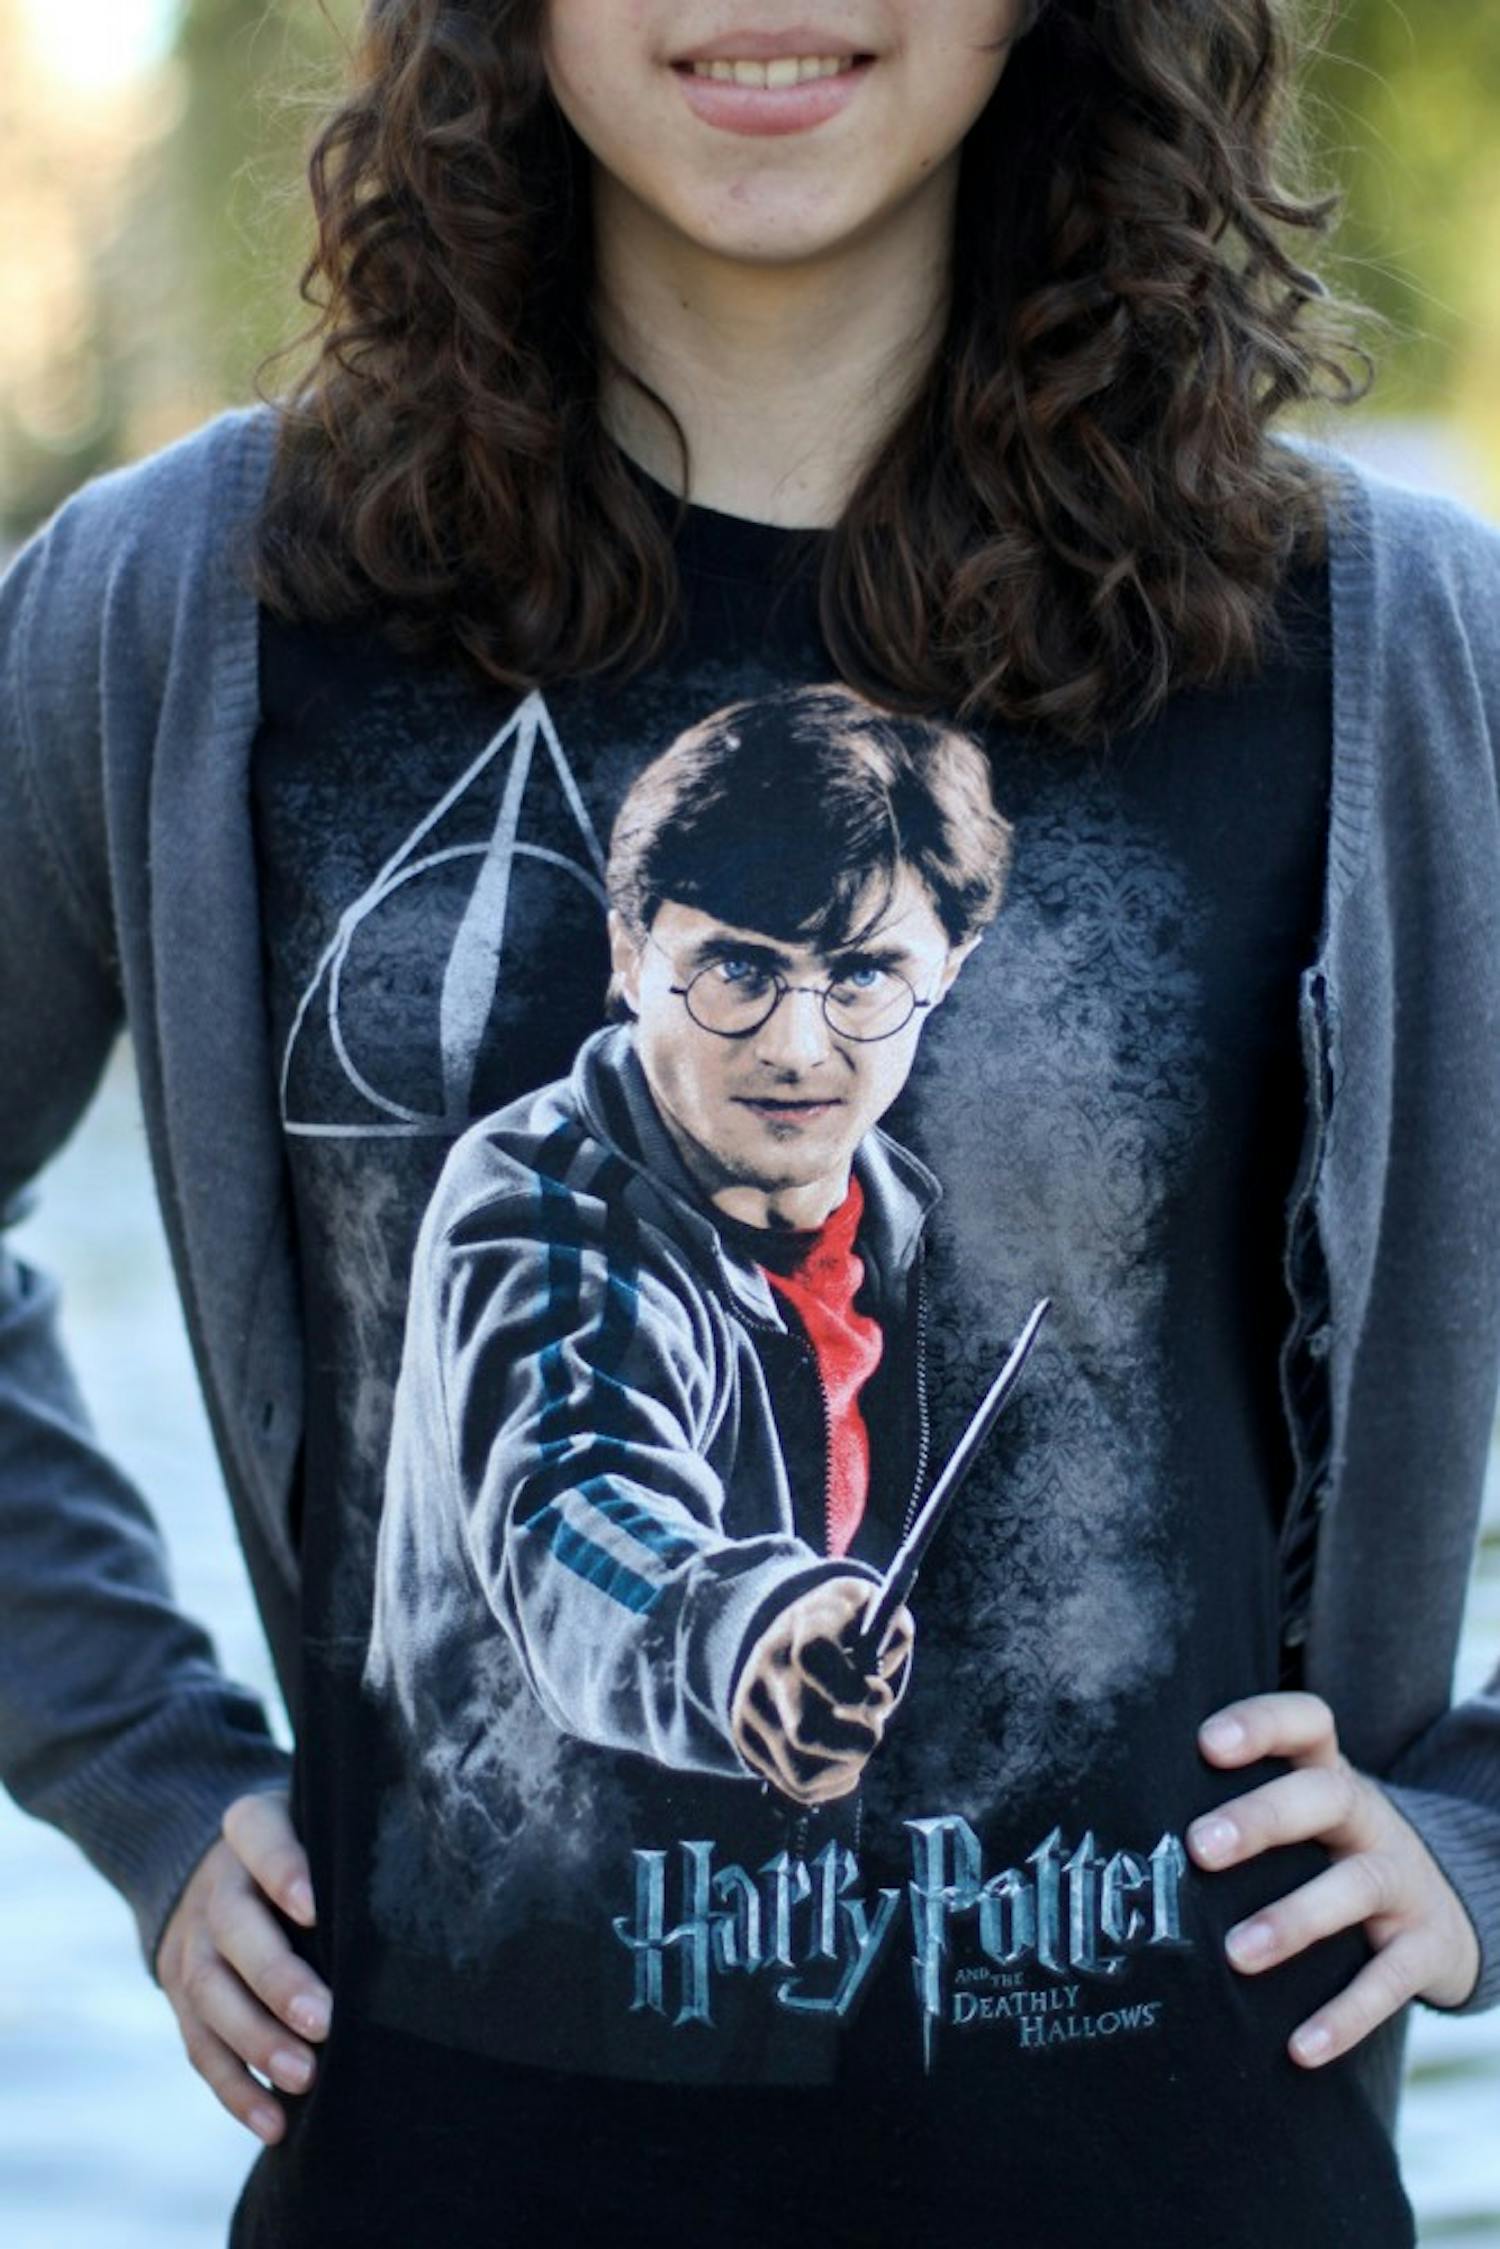 Holly Solis, president and co-founder of Dumbledore’s Army shows off her Harry Potter shirt.  Photo by Peter Lazaravich.